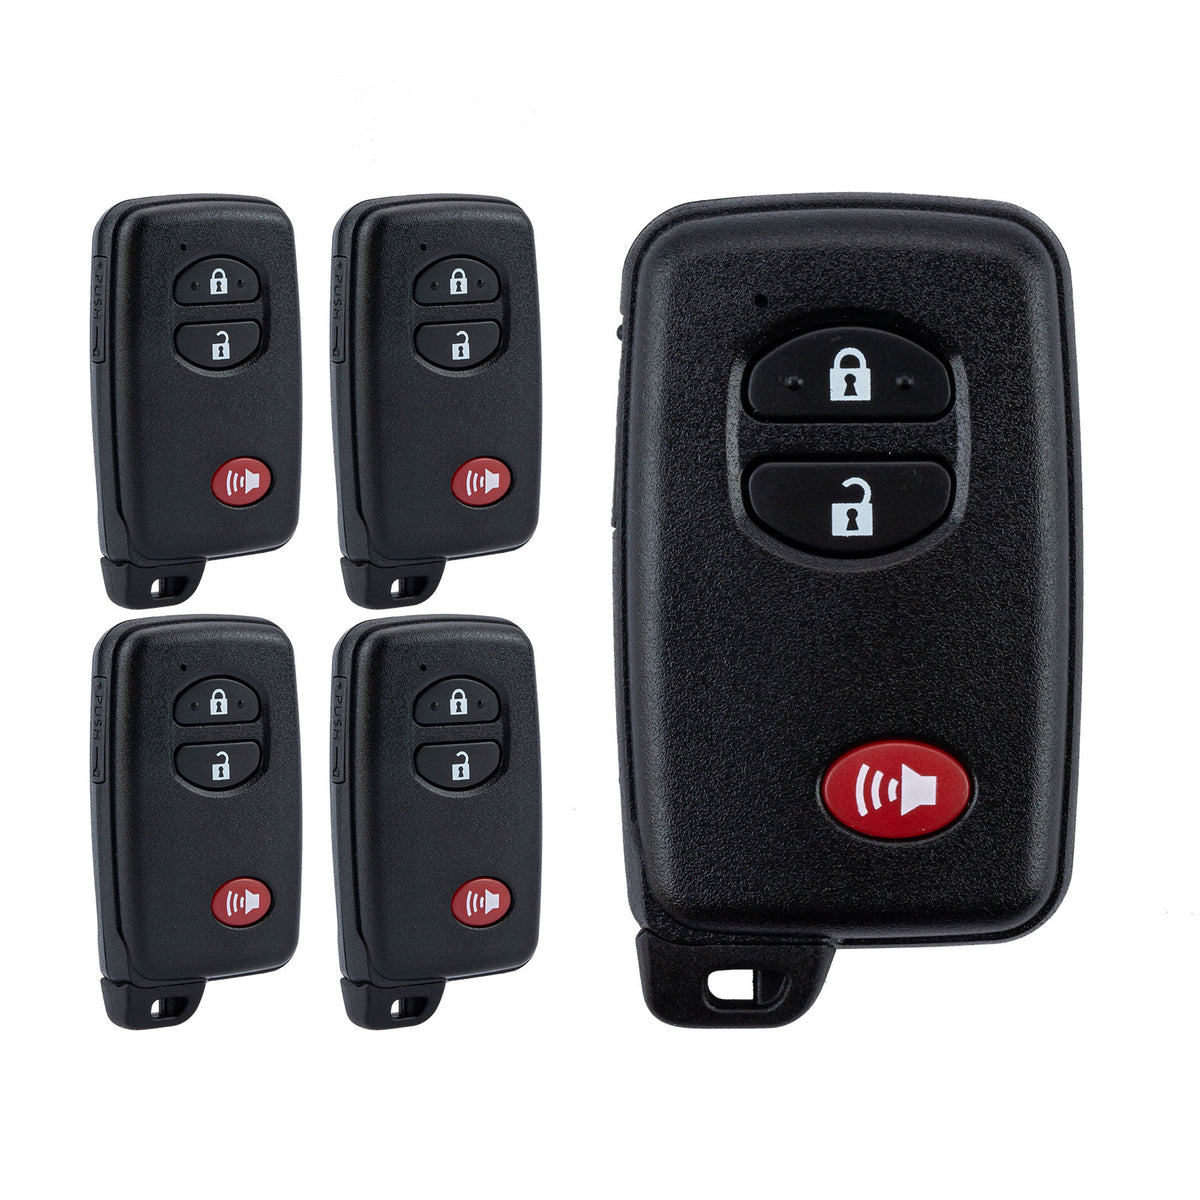 New Smart keyless Entry Remote 3BTN Replacement for Toyota Highlander Land Cruiser Rav4 with FCC ID: HYQ14AAB 0140